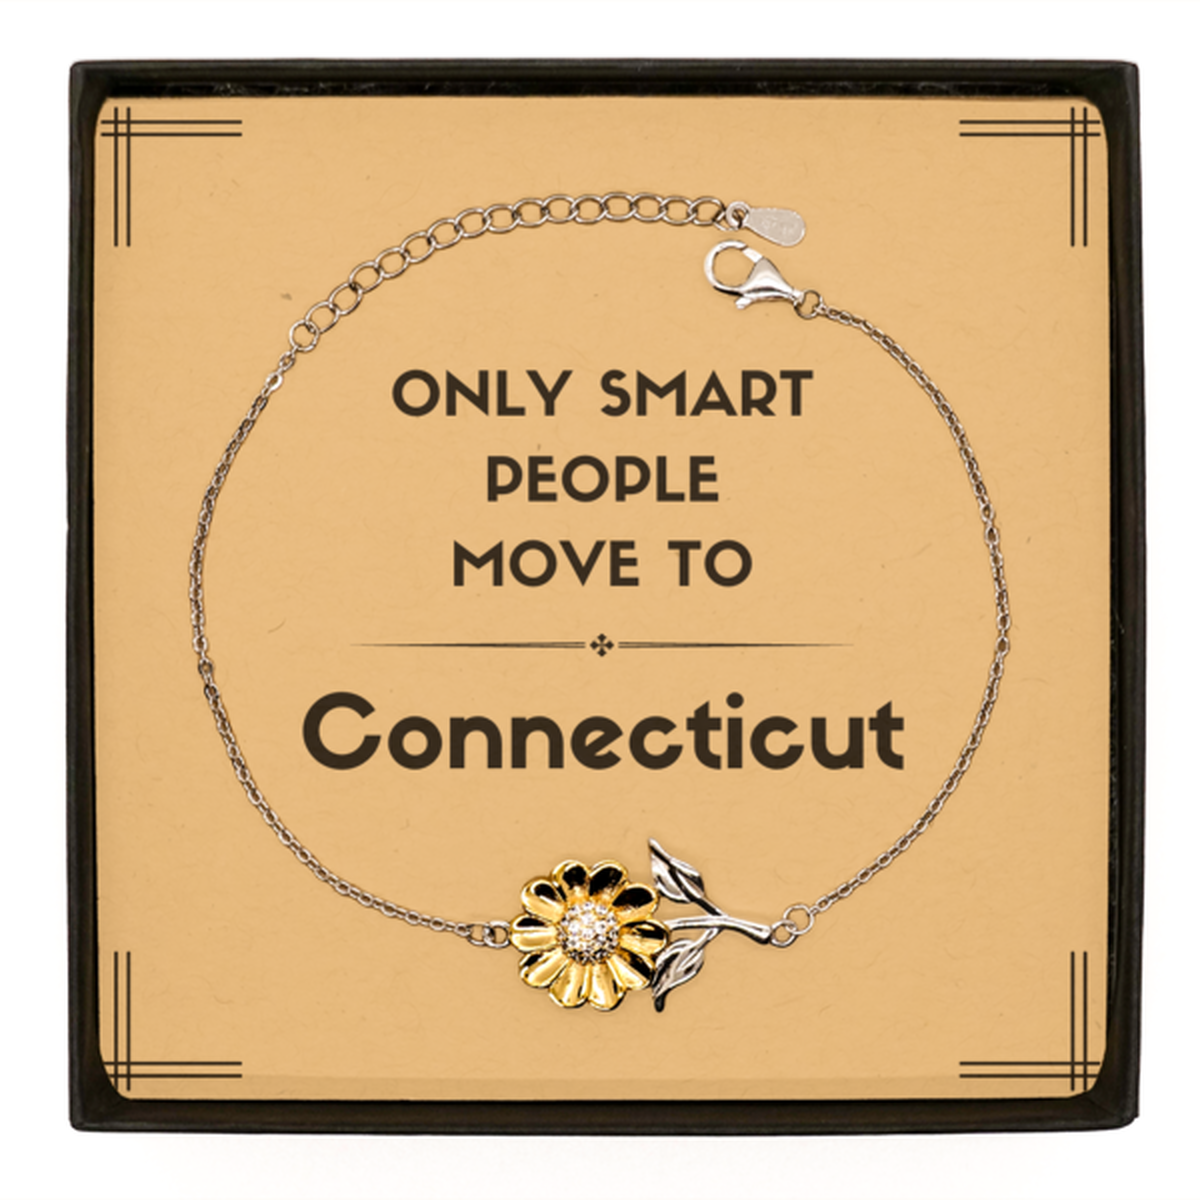 Only smart people move to Connecticut Sunflower Bracelet, Message Card Gifts For Connecticut, Move to Connecticut Gifts for Friends Coworker Funny Saying Quote